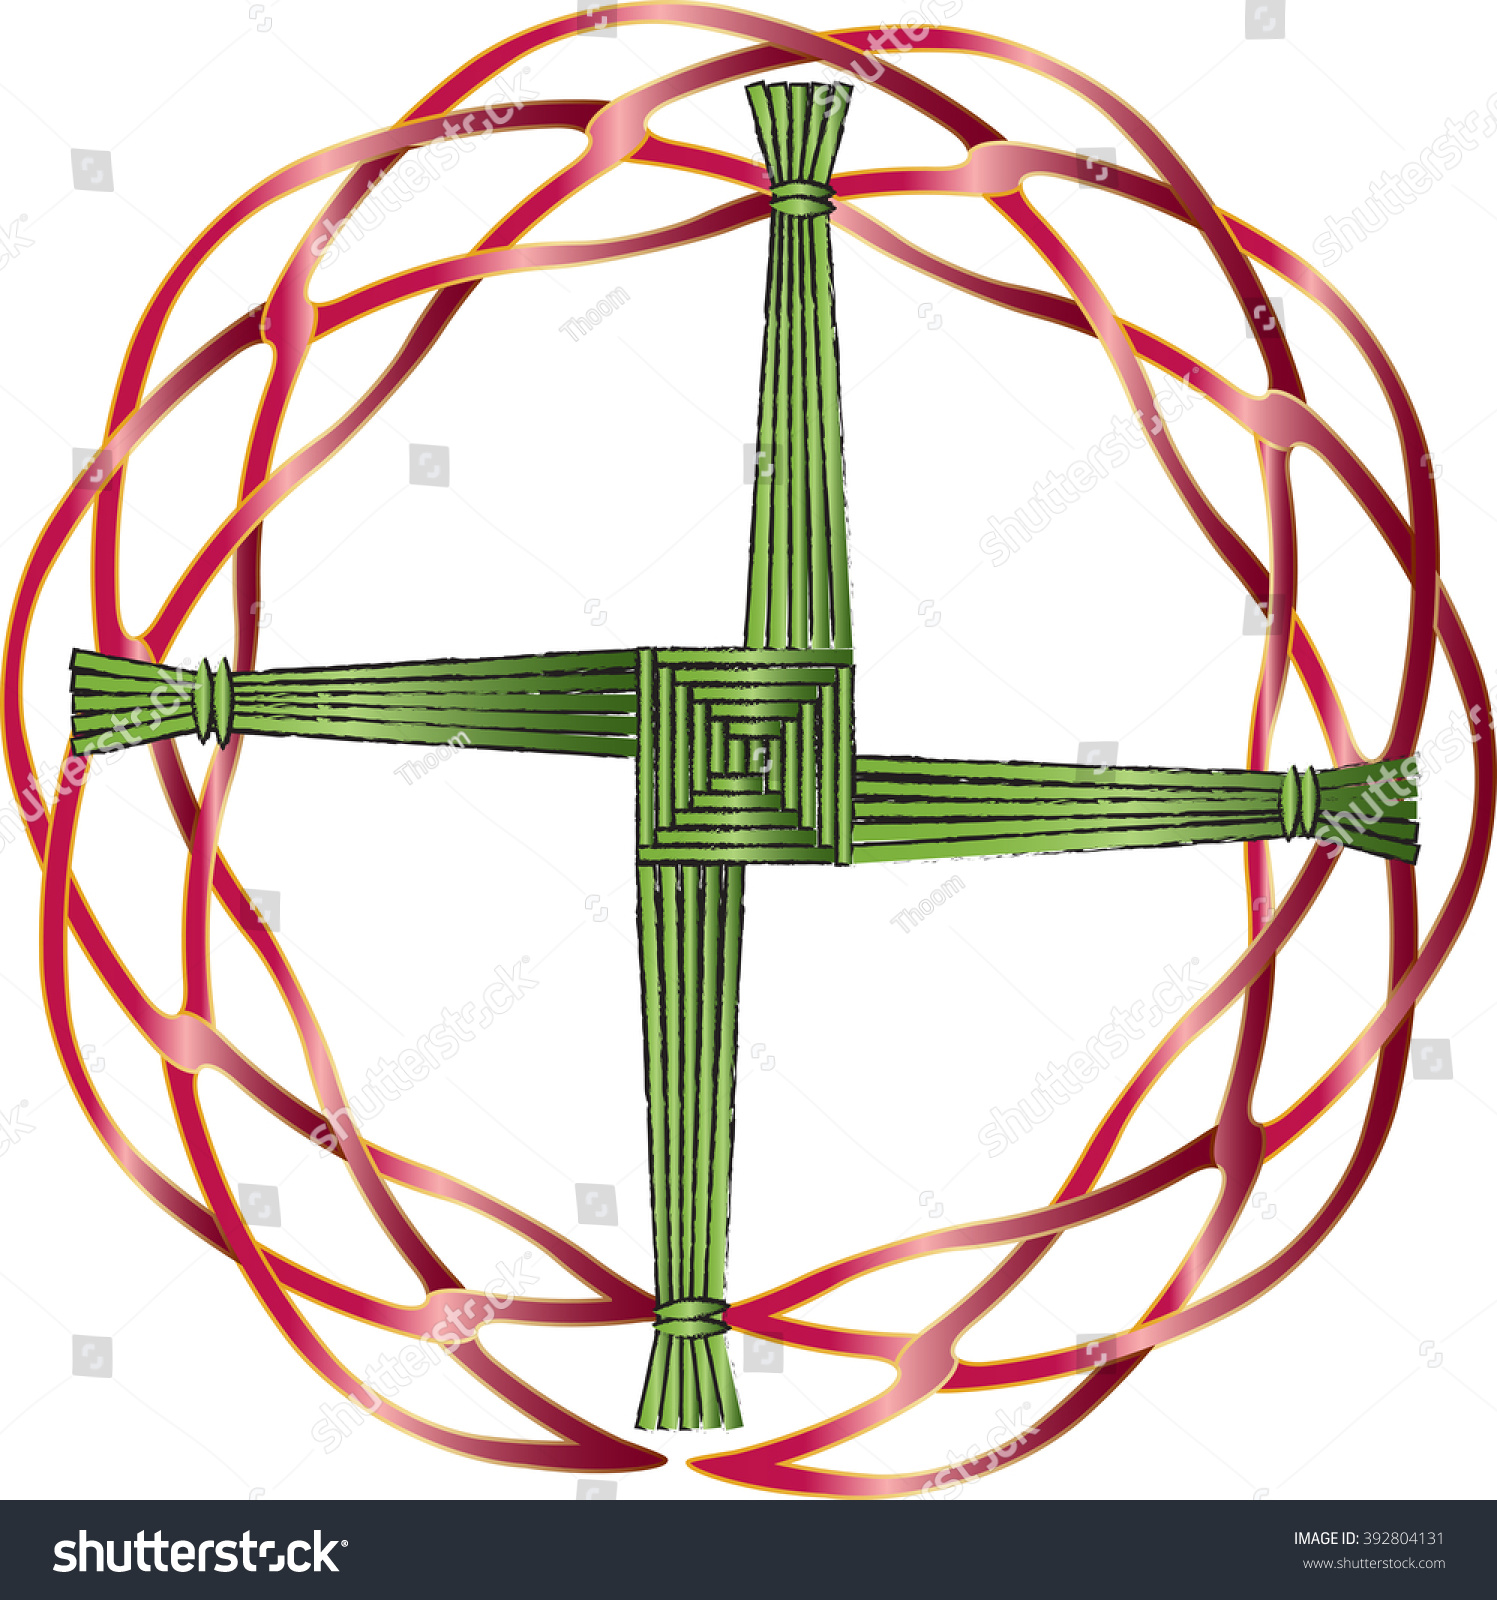 SVG of St Brigid's cross made of straw to protect the house from evil and fire. A Celtic design with braided celtic knot round frame. svg